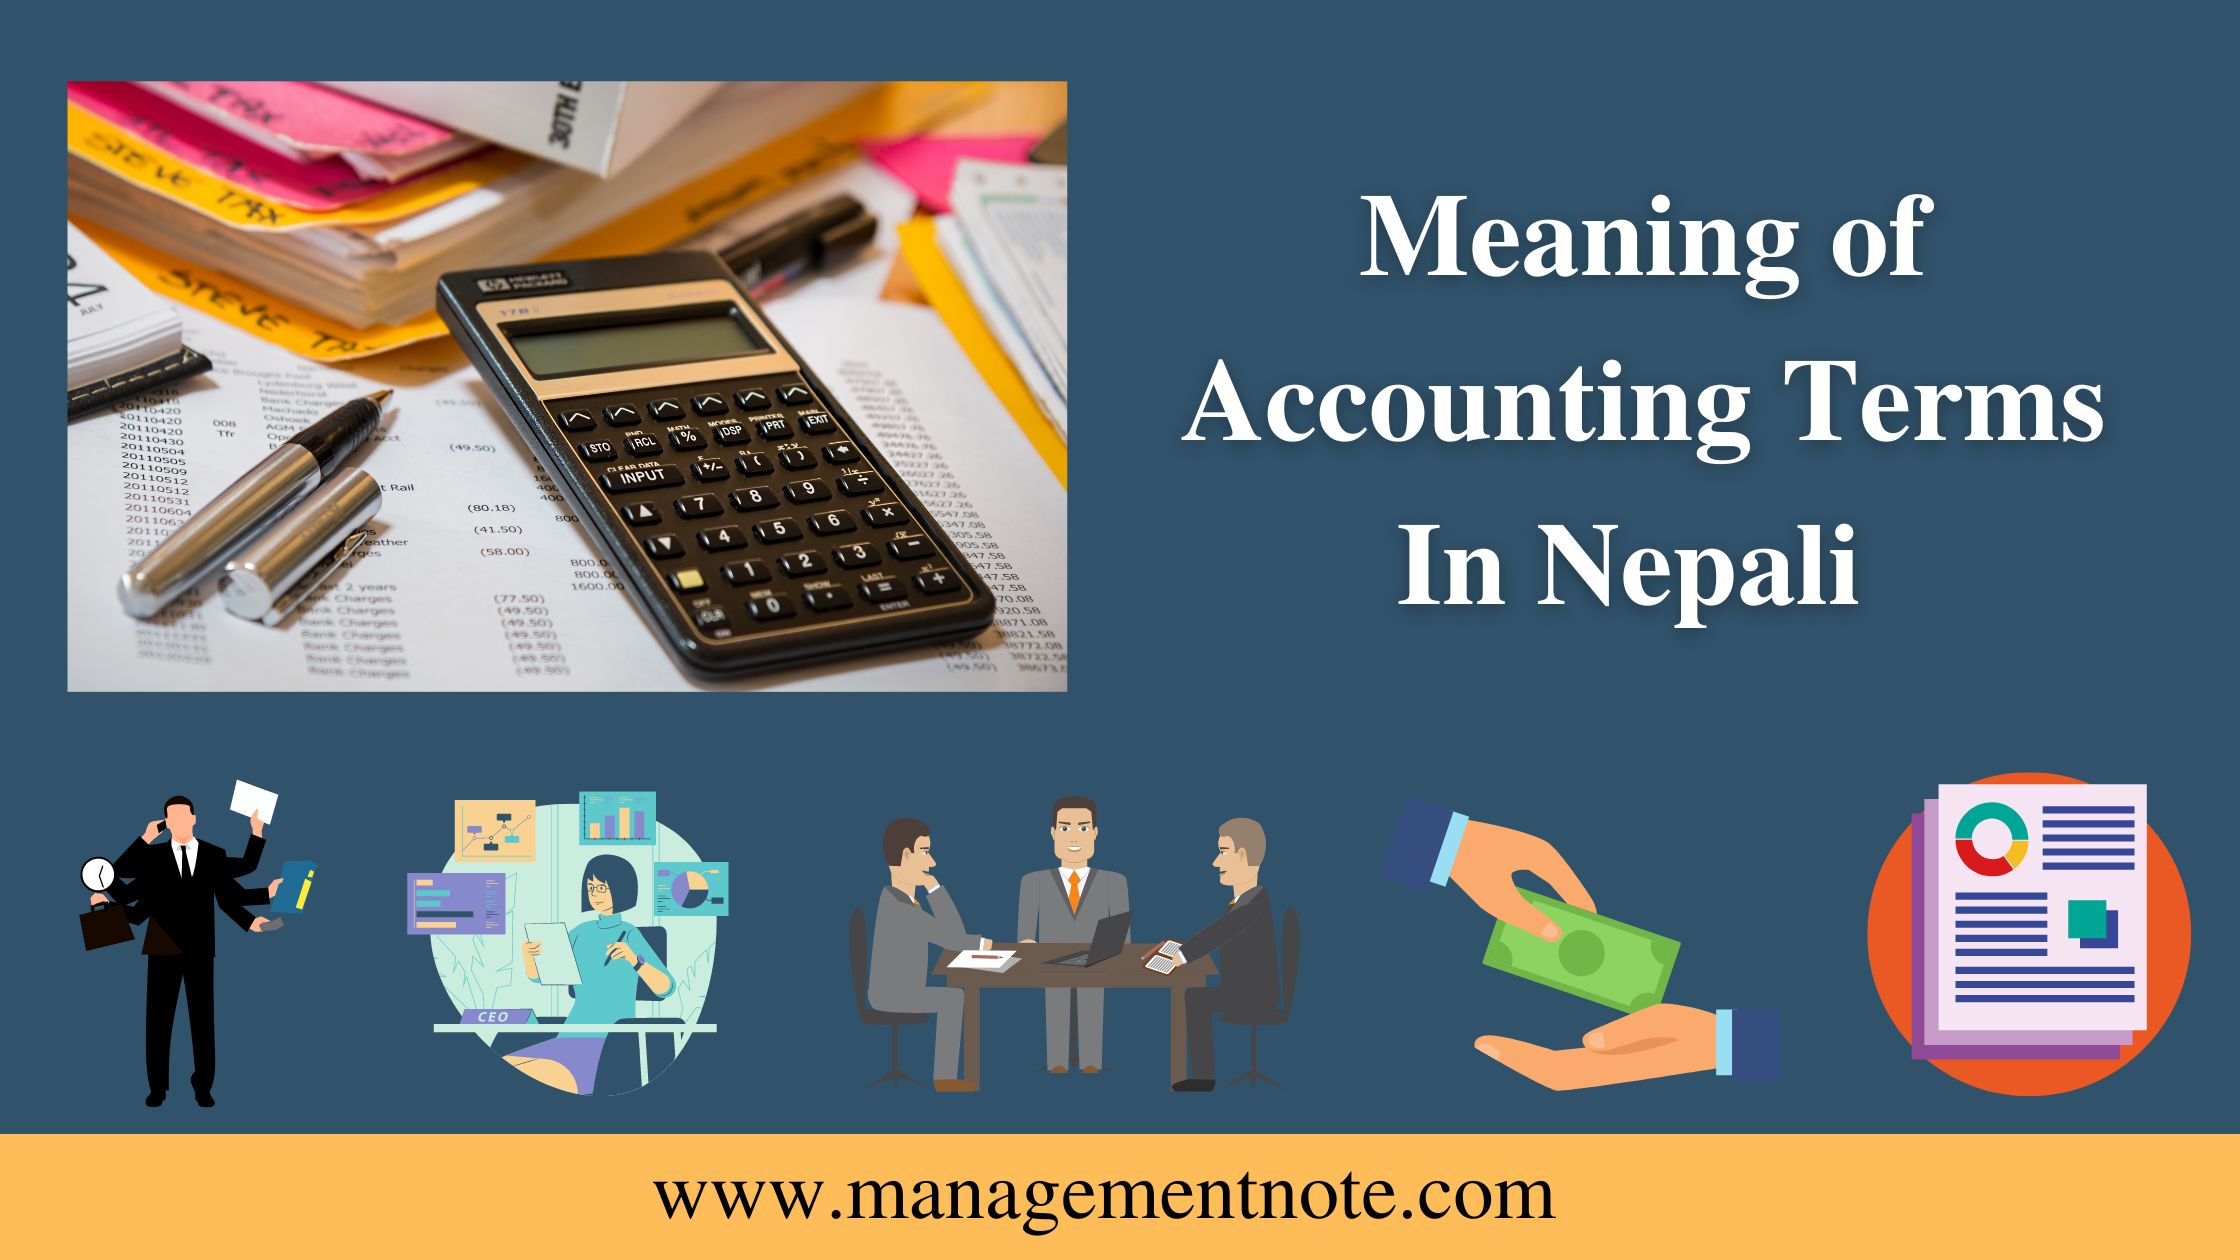 Meaning of Accounting Terms In Nepali